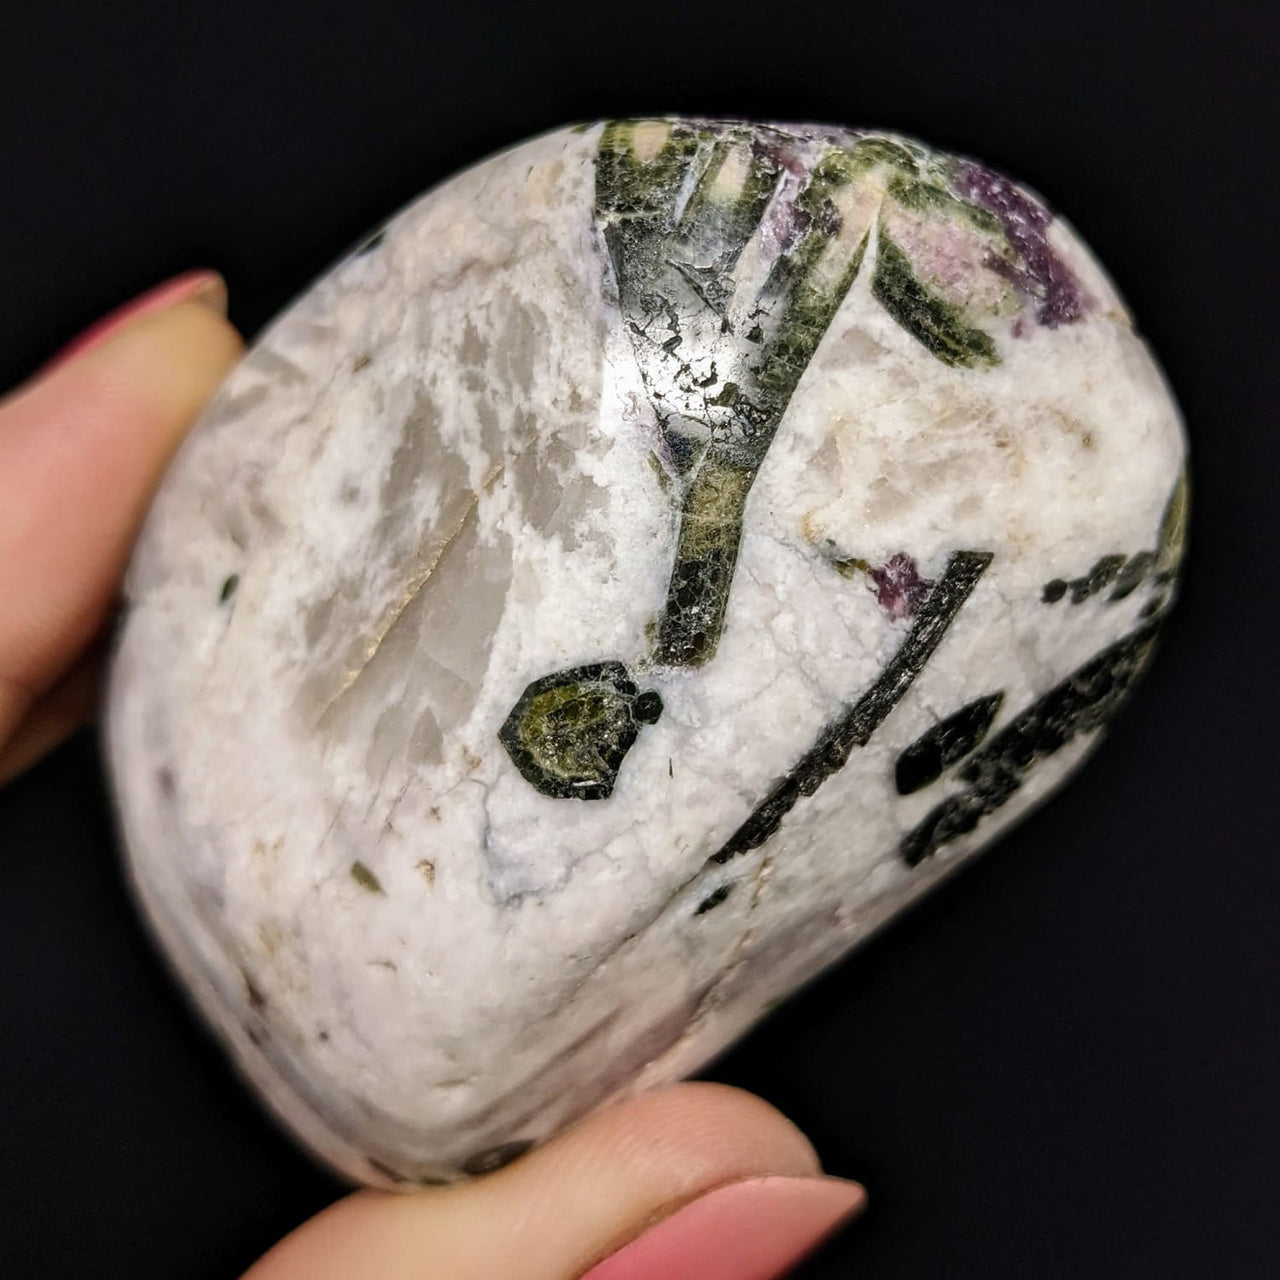 Tourmaline Conglomerate Polished Pebble (161g) #SK6806